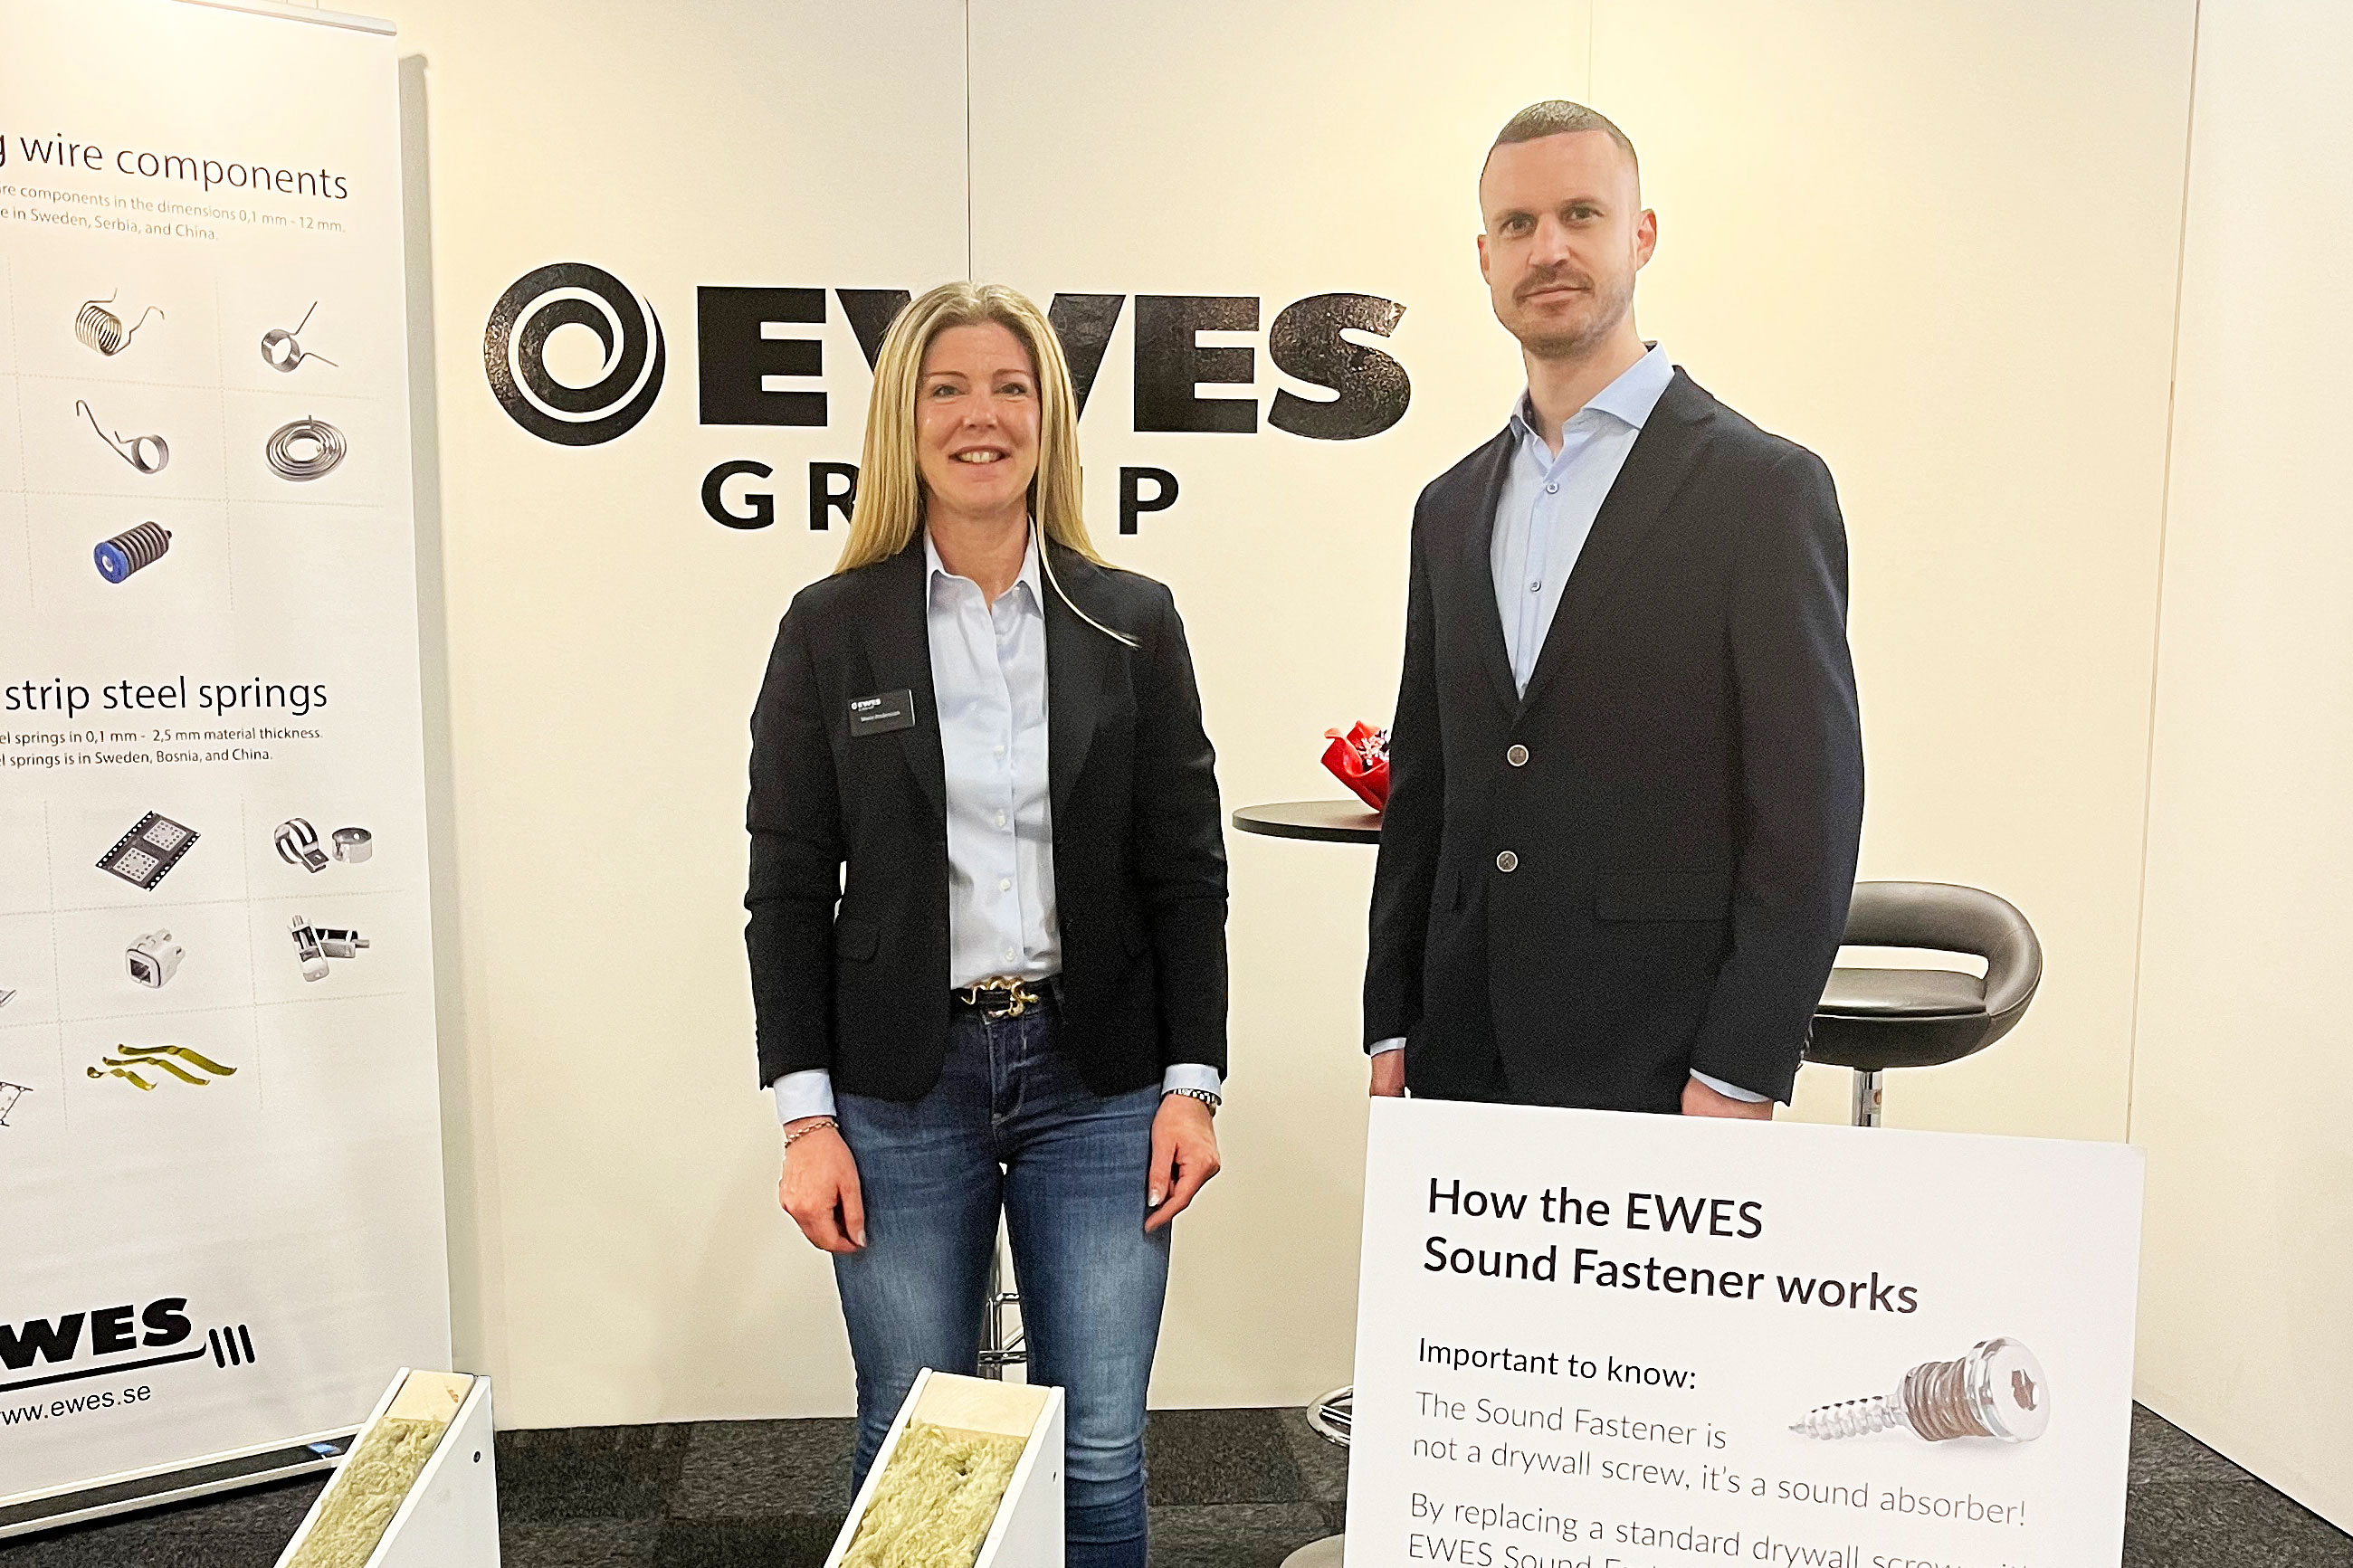 Maria Andersson, Marketing Manager and Nikola Tosic, sales from EWES AB